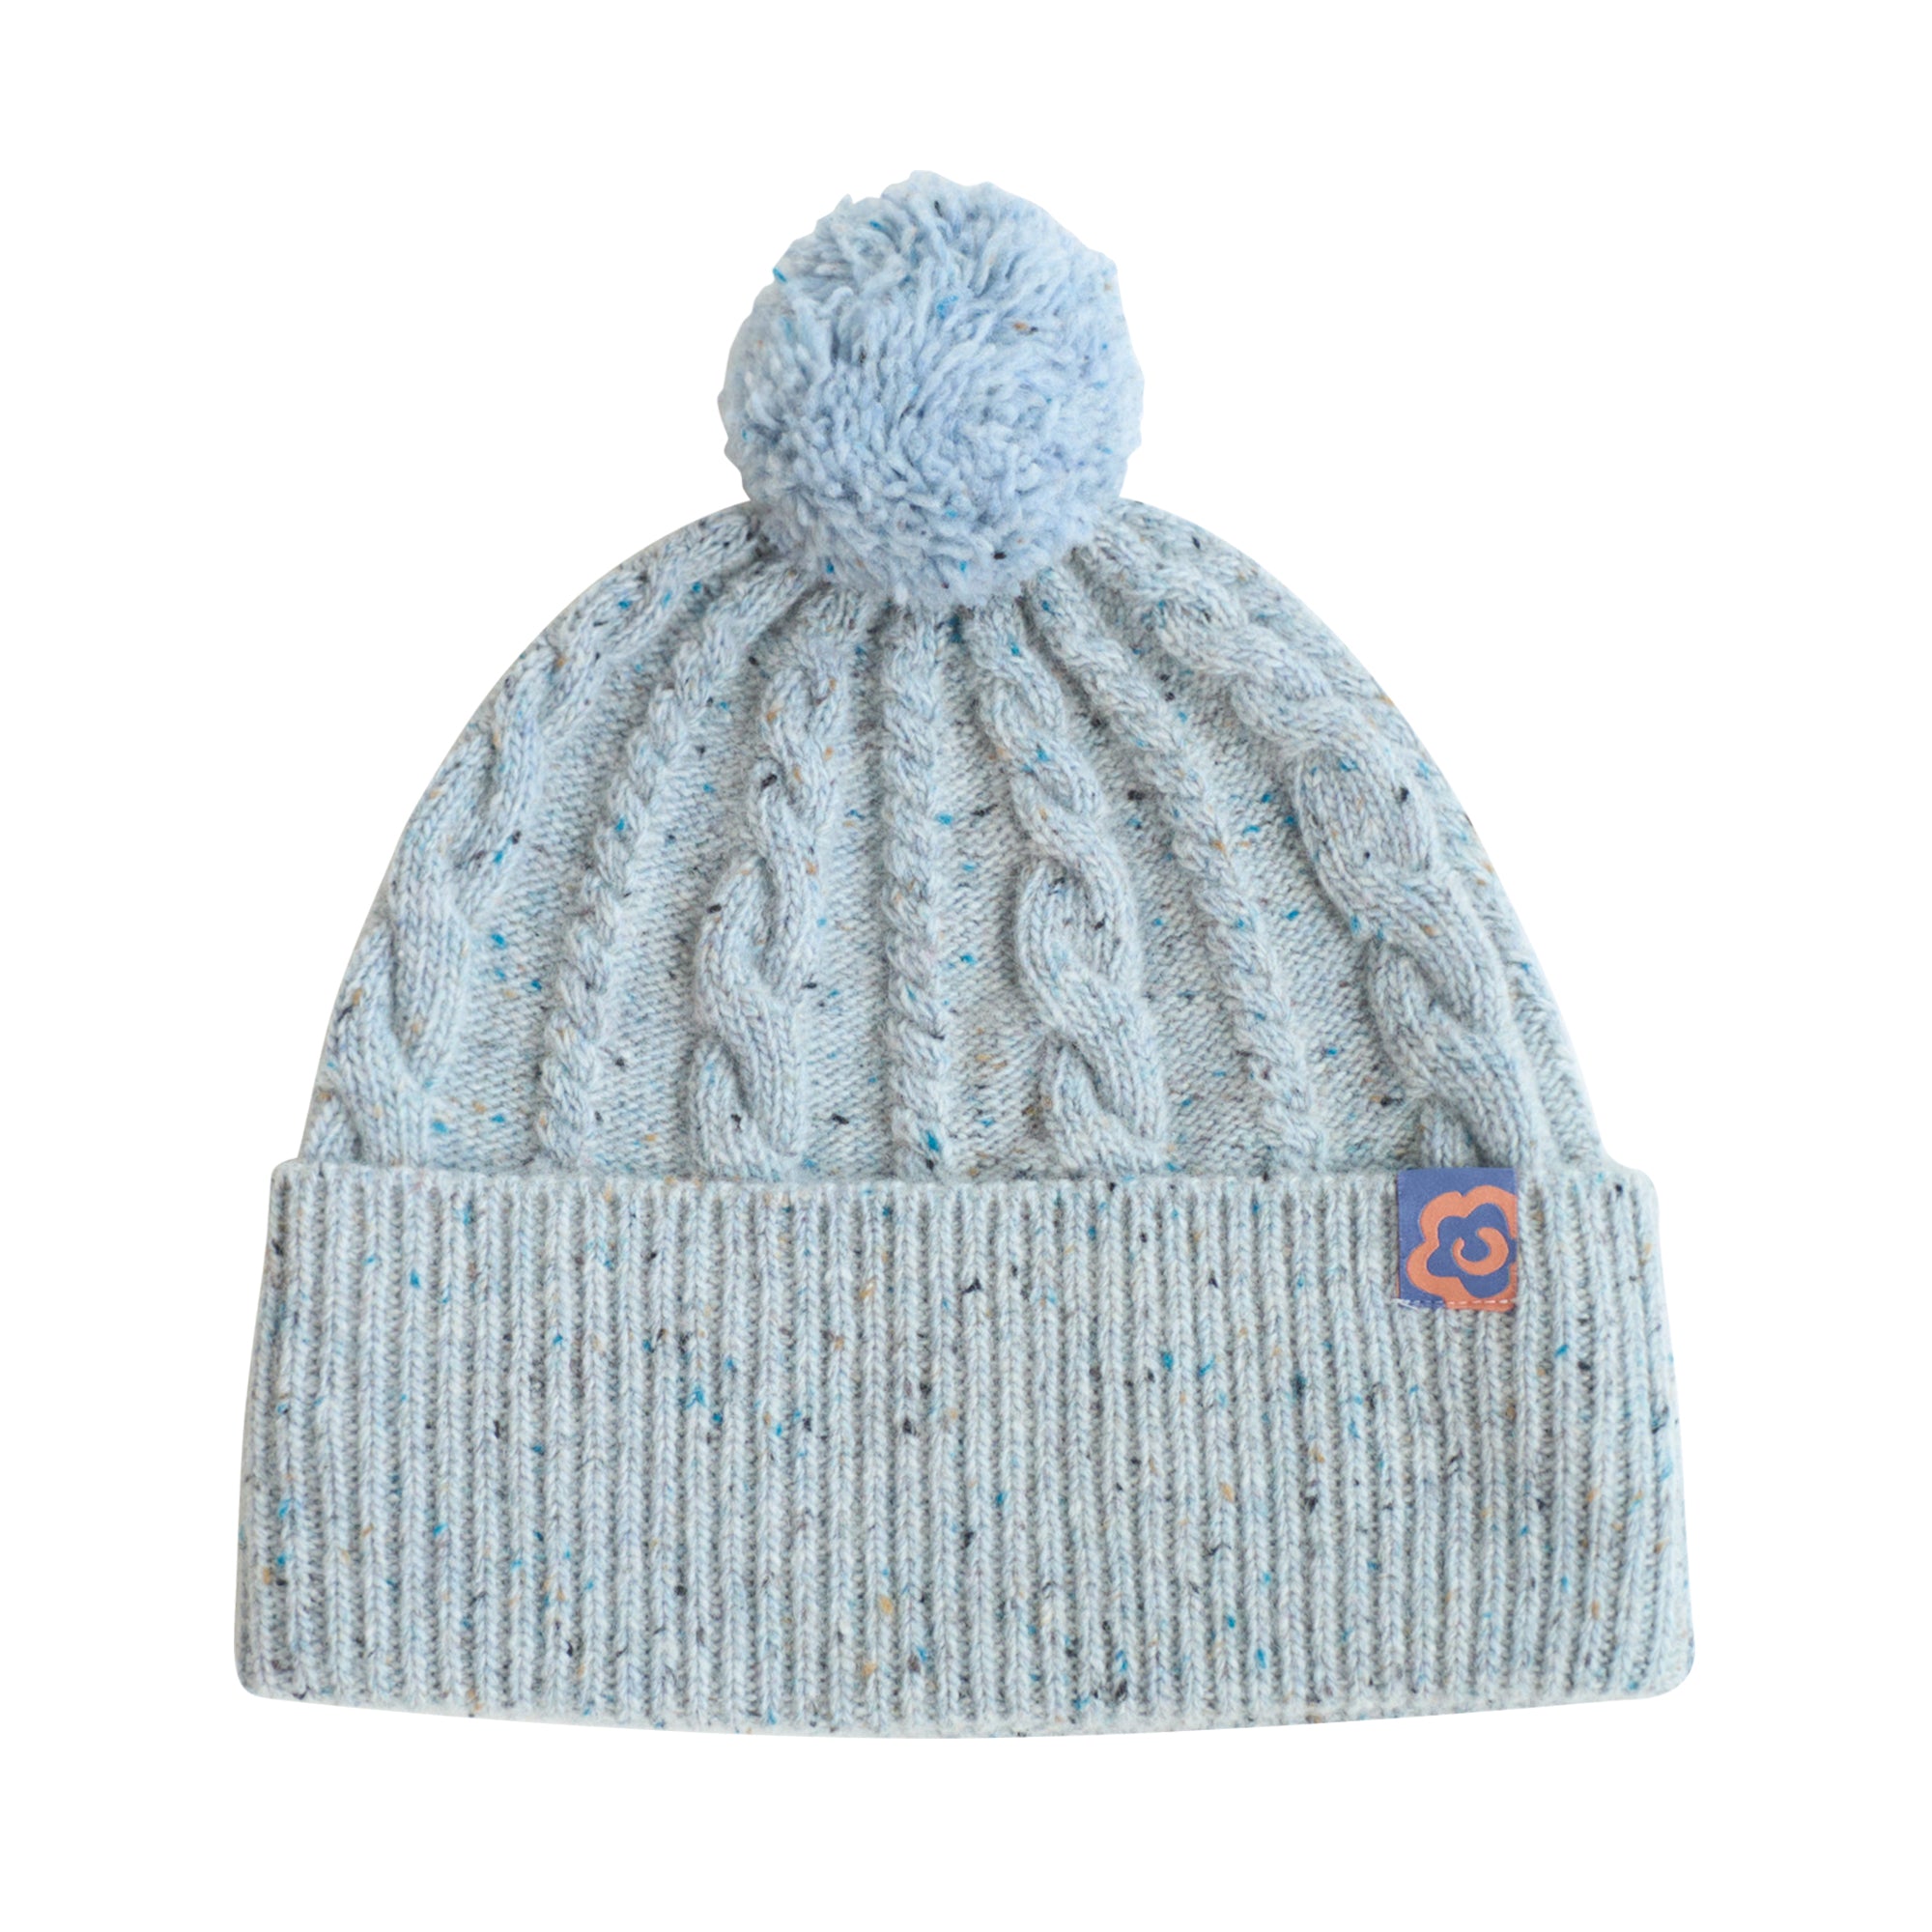 "Pom Pom" Cable Knit Wool Beanie Hat - Icy Blue product